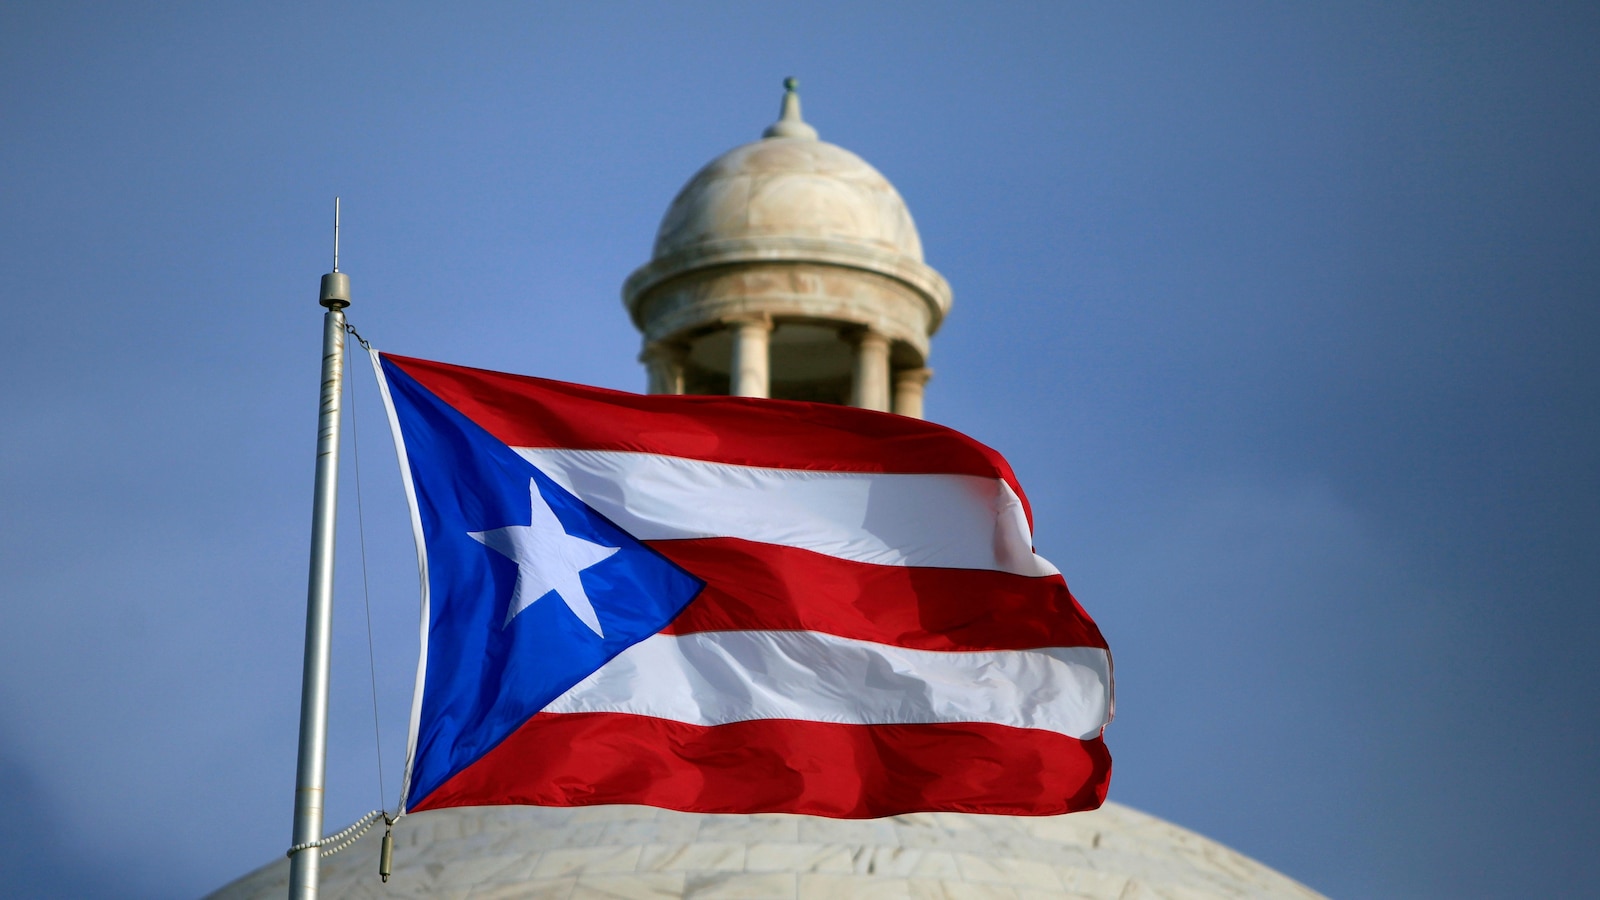 Puerto Rico sues former officials accused of corruption to recover more than $30M in public funds #Puerto #Rico #sues #officials #accused #corruption #recover #30M #public #funds